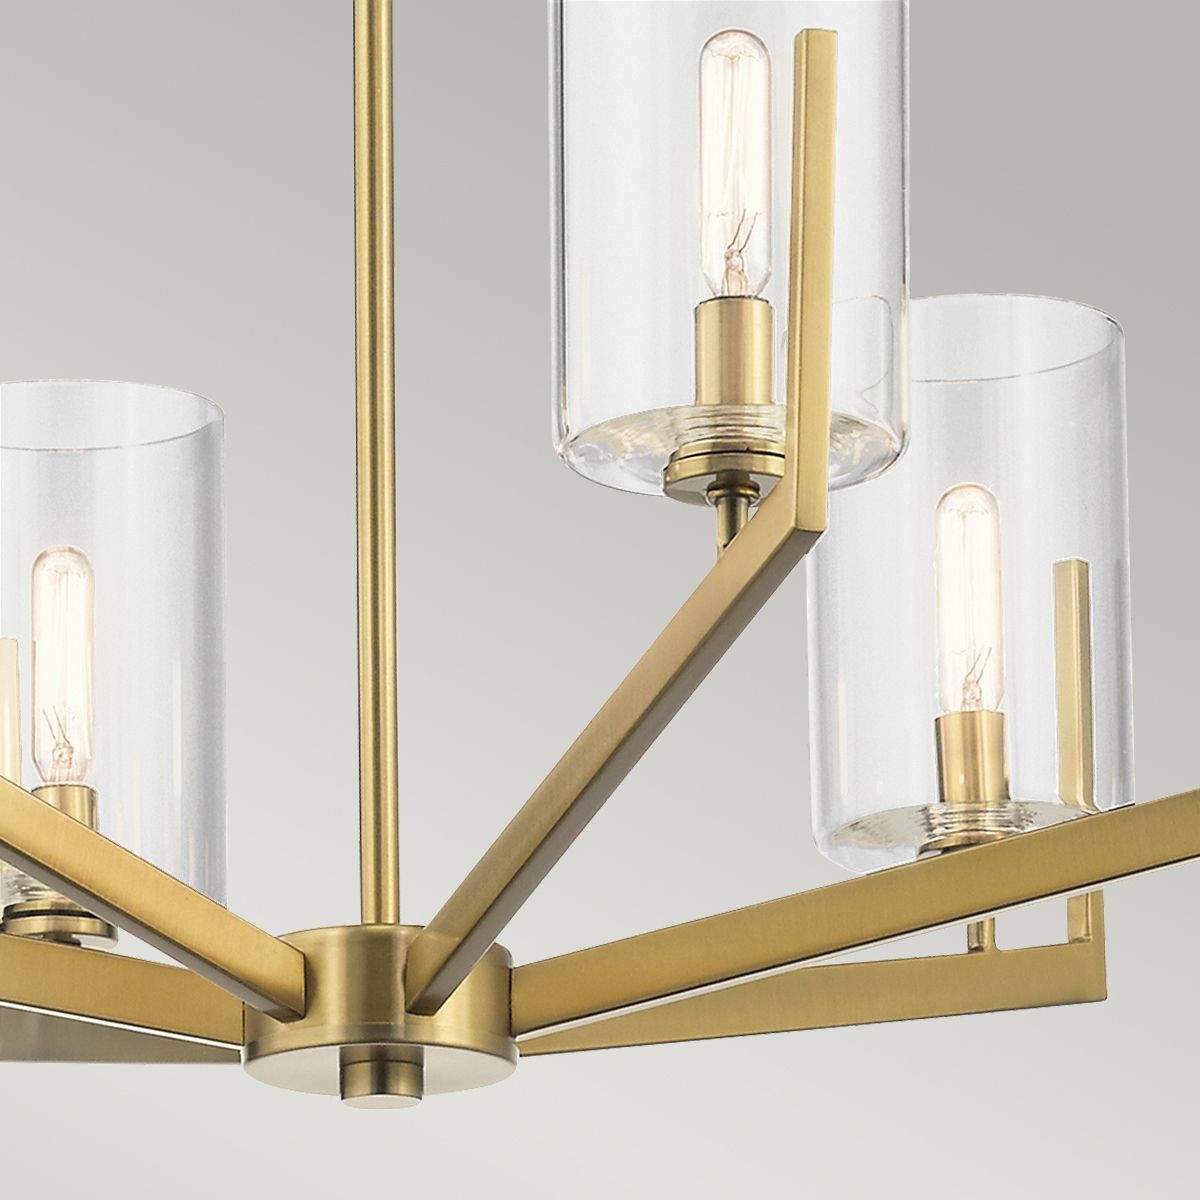 6 Light Ceiling Chandelier in Brushed Natural Brass Finish